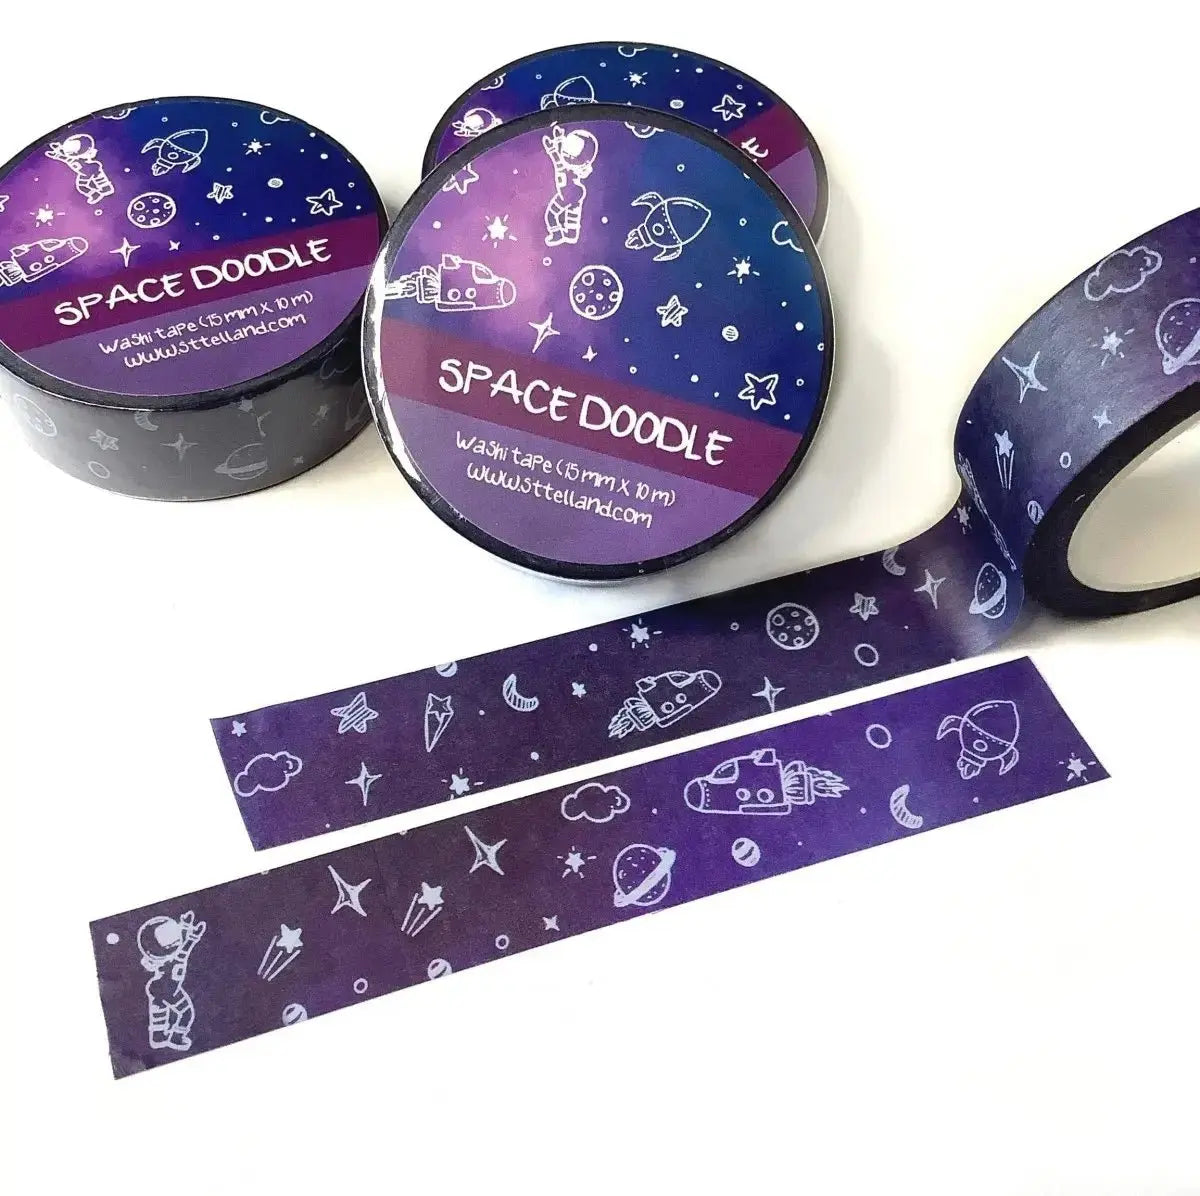 Space Doodles Washi Tape - custom washi tape - Washi Tape - Constellation Tape - Eco Friendly Tape - Art, Deco Gift for Flower Lovers Sttelland Boutique